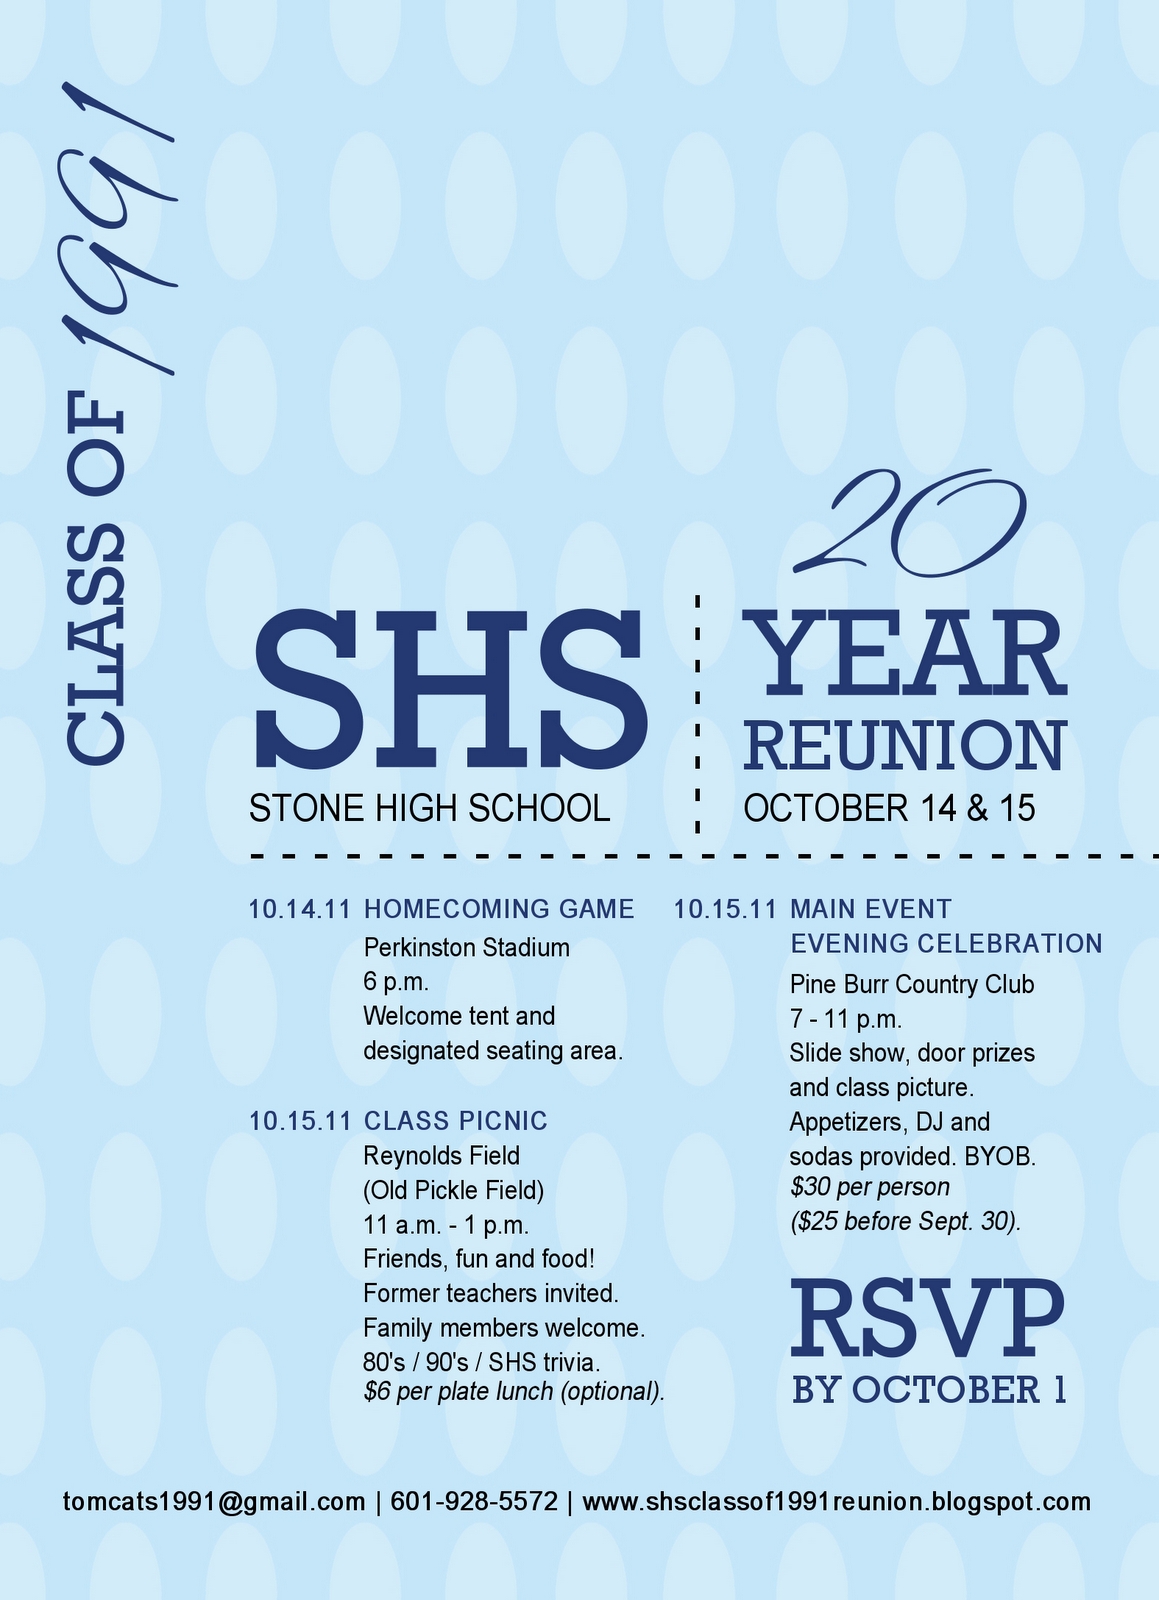 10 Unique Class Reunion Ideas 20 Year stone high class of 1991 20 year reunion reunion invitation h s 2022